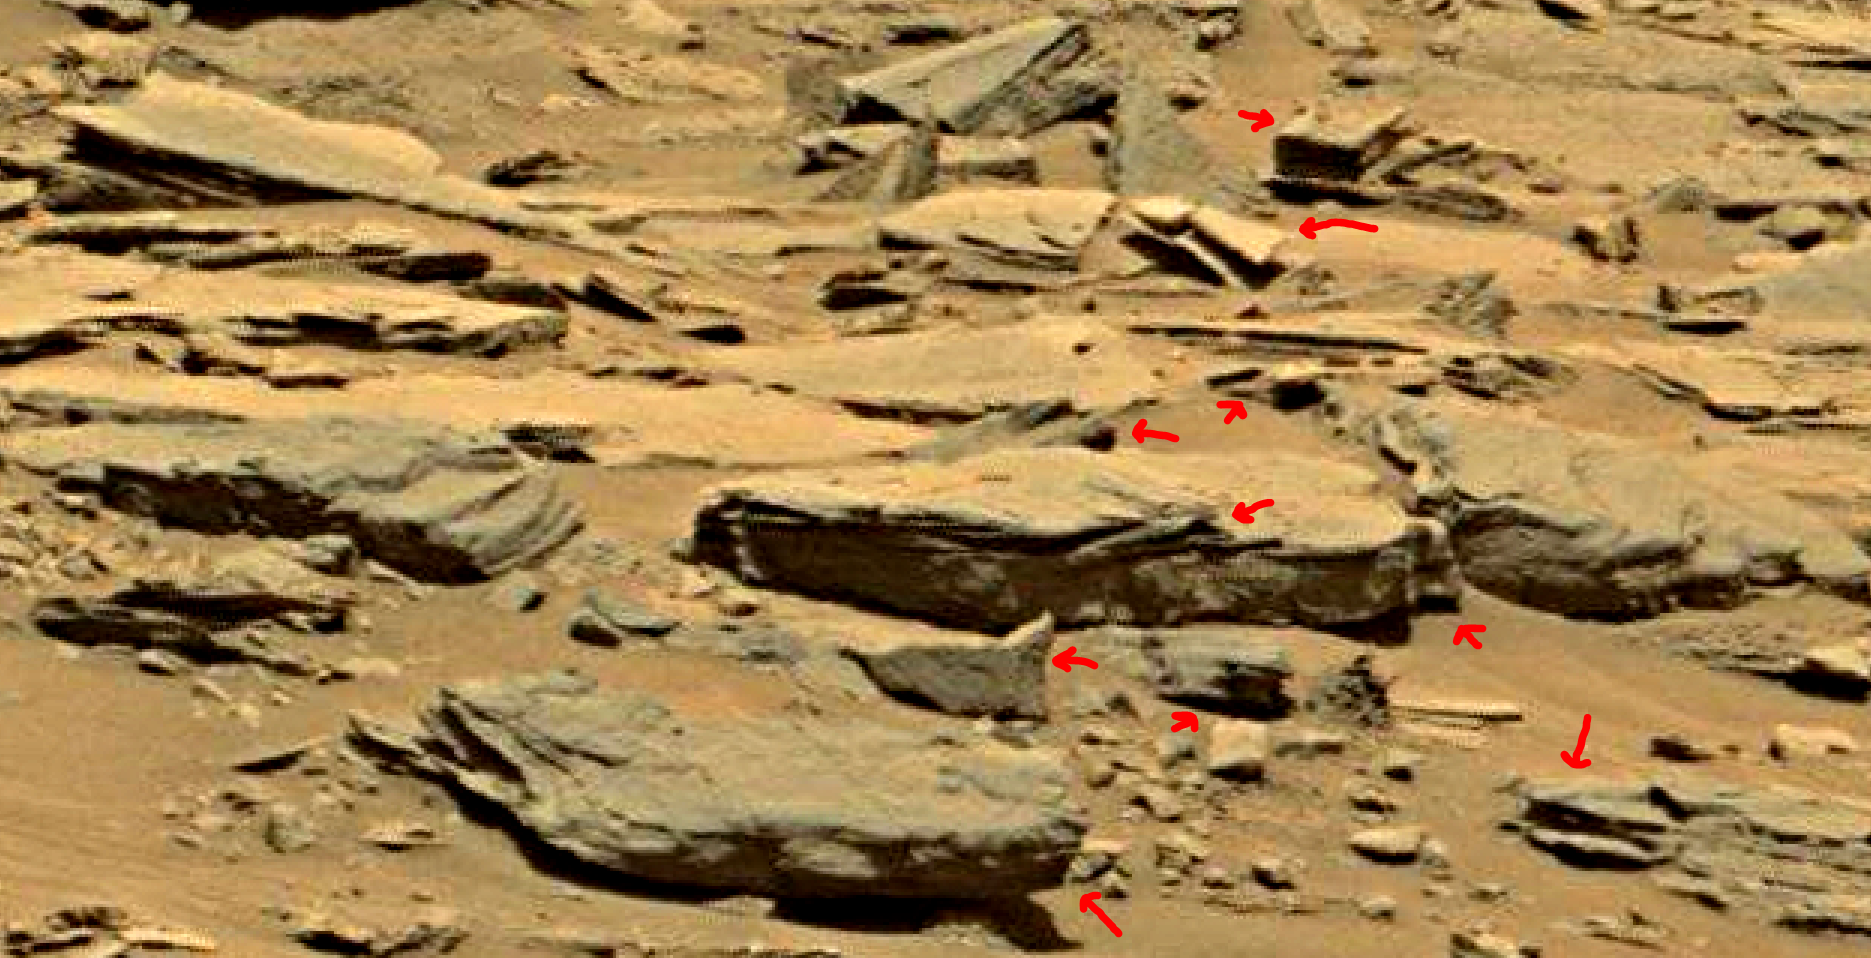 mars sol 1353 anomaly-artifacts 34a was life on mars